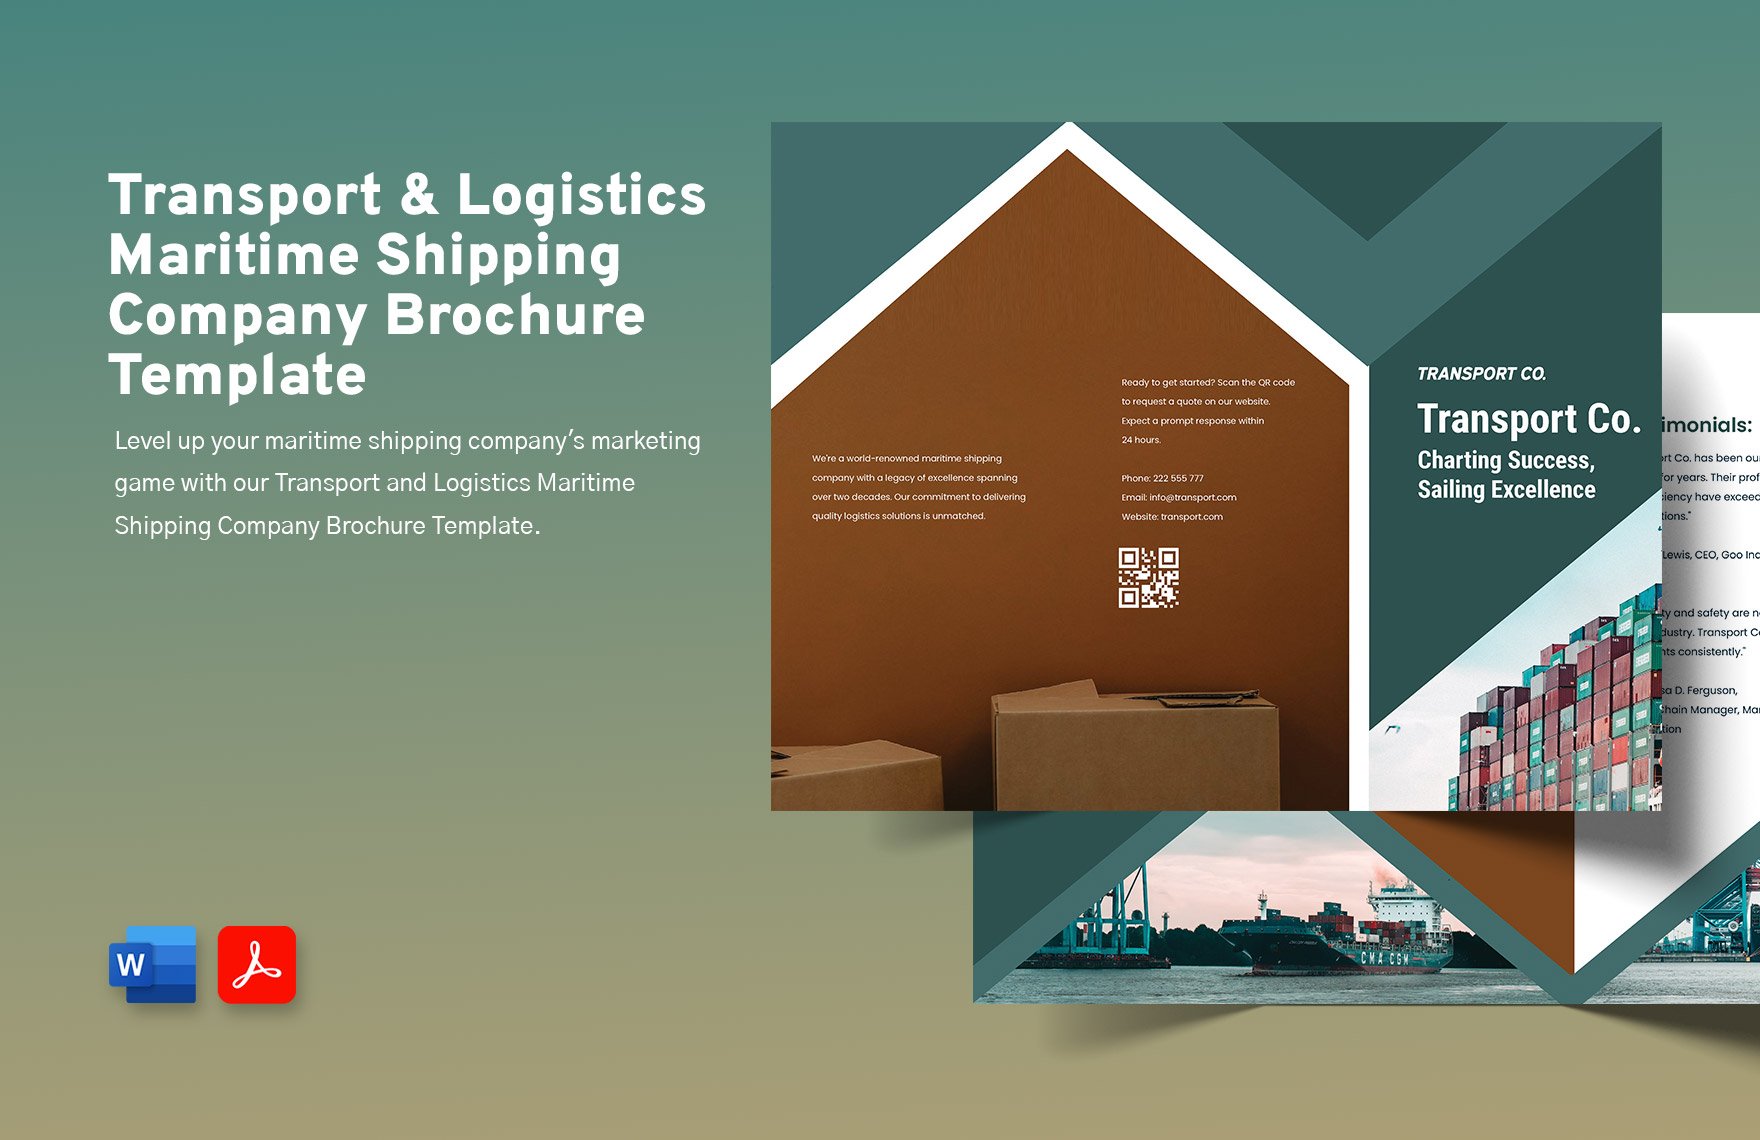 Transport and Logistics Maritime Shipping Company Brochure Template